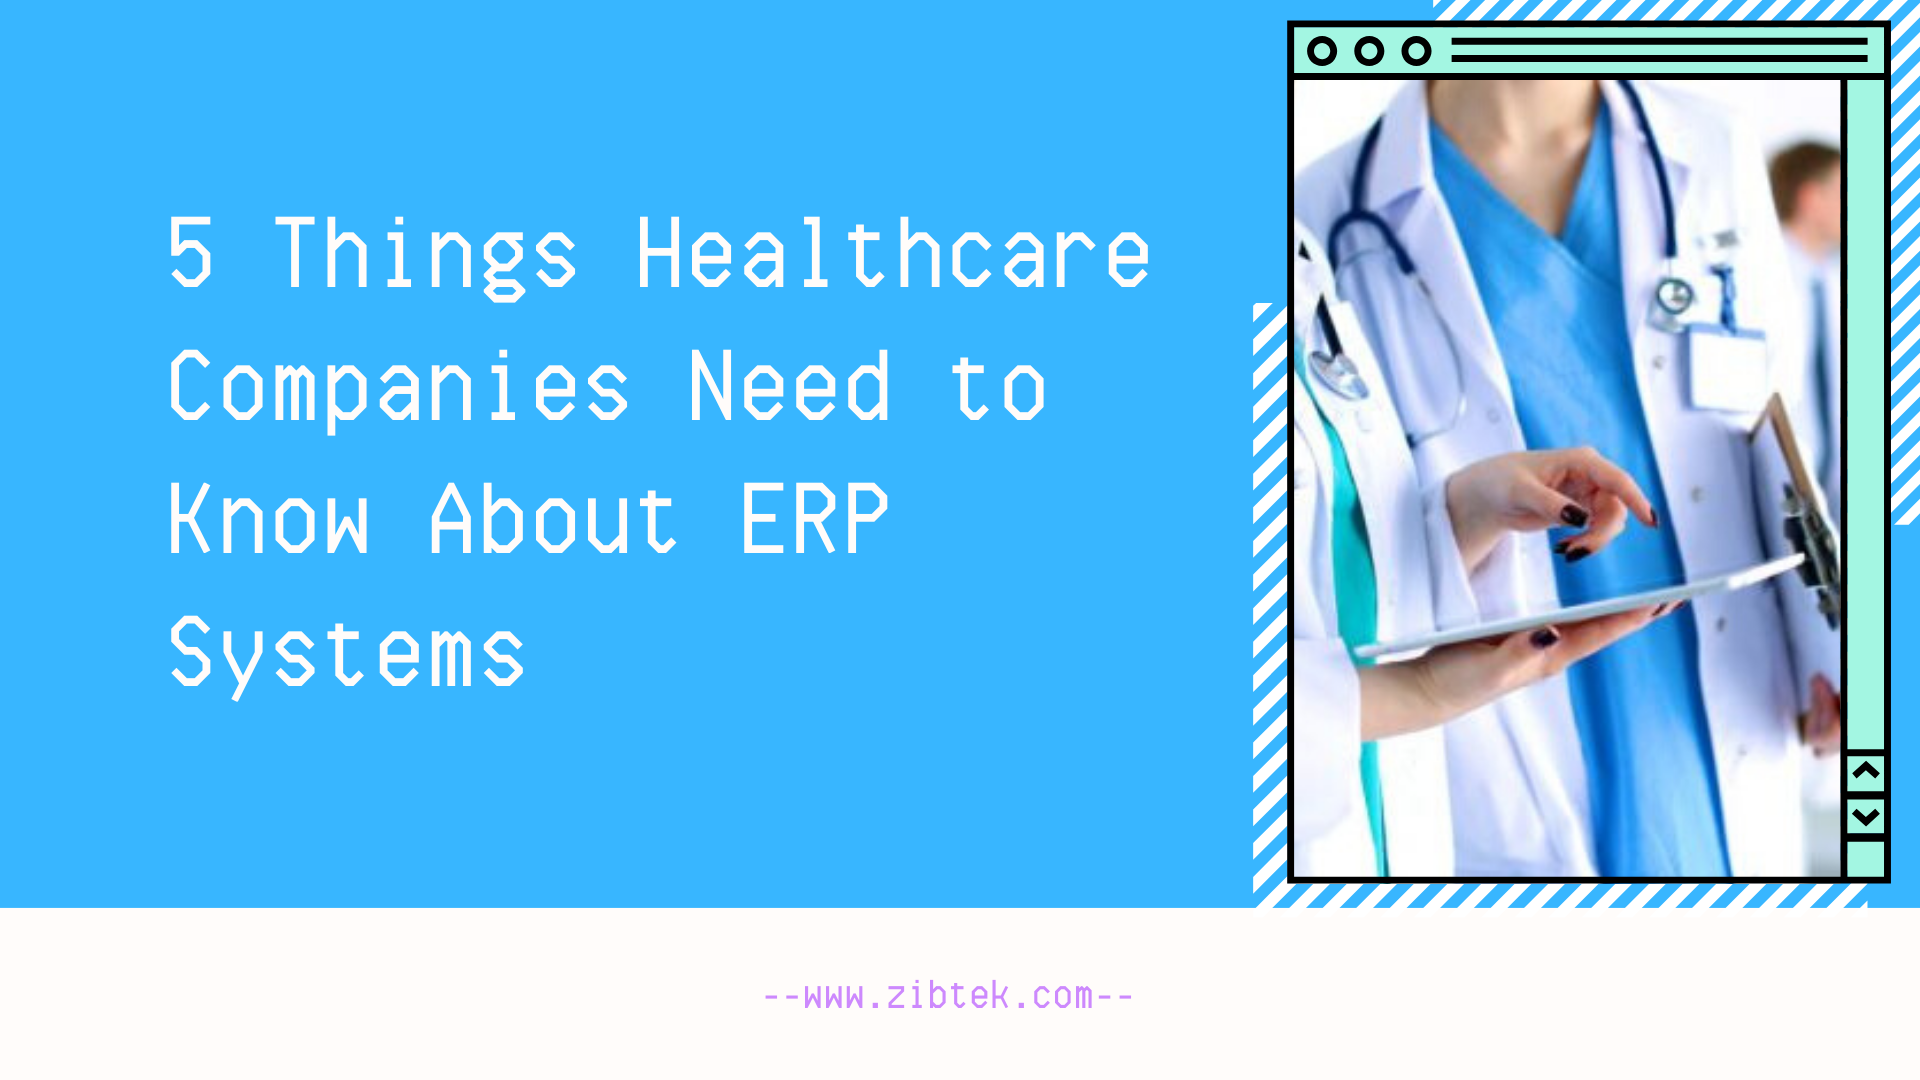 Five Things Healthcare Companies Need to Know About ERP Systems